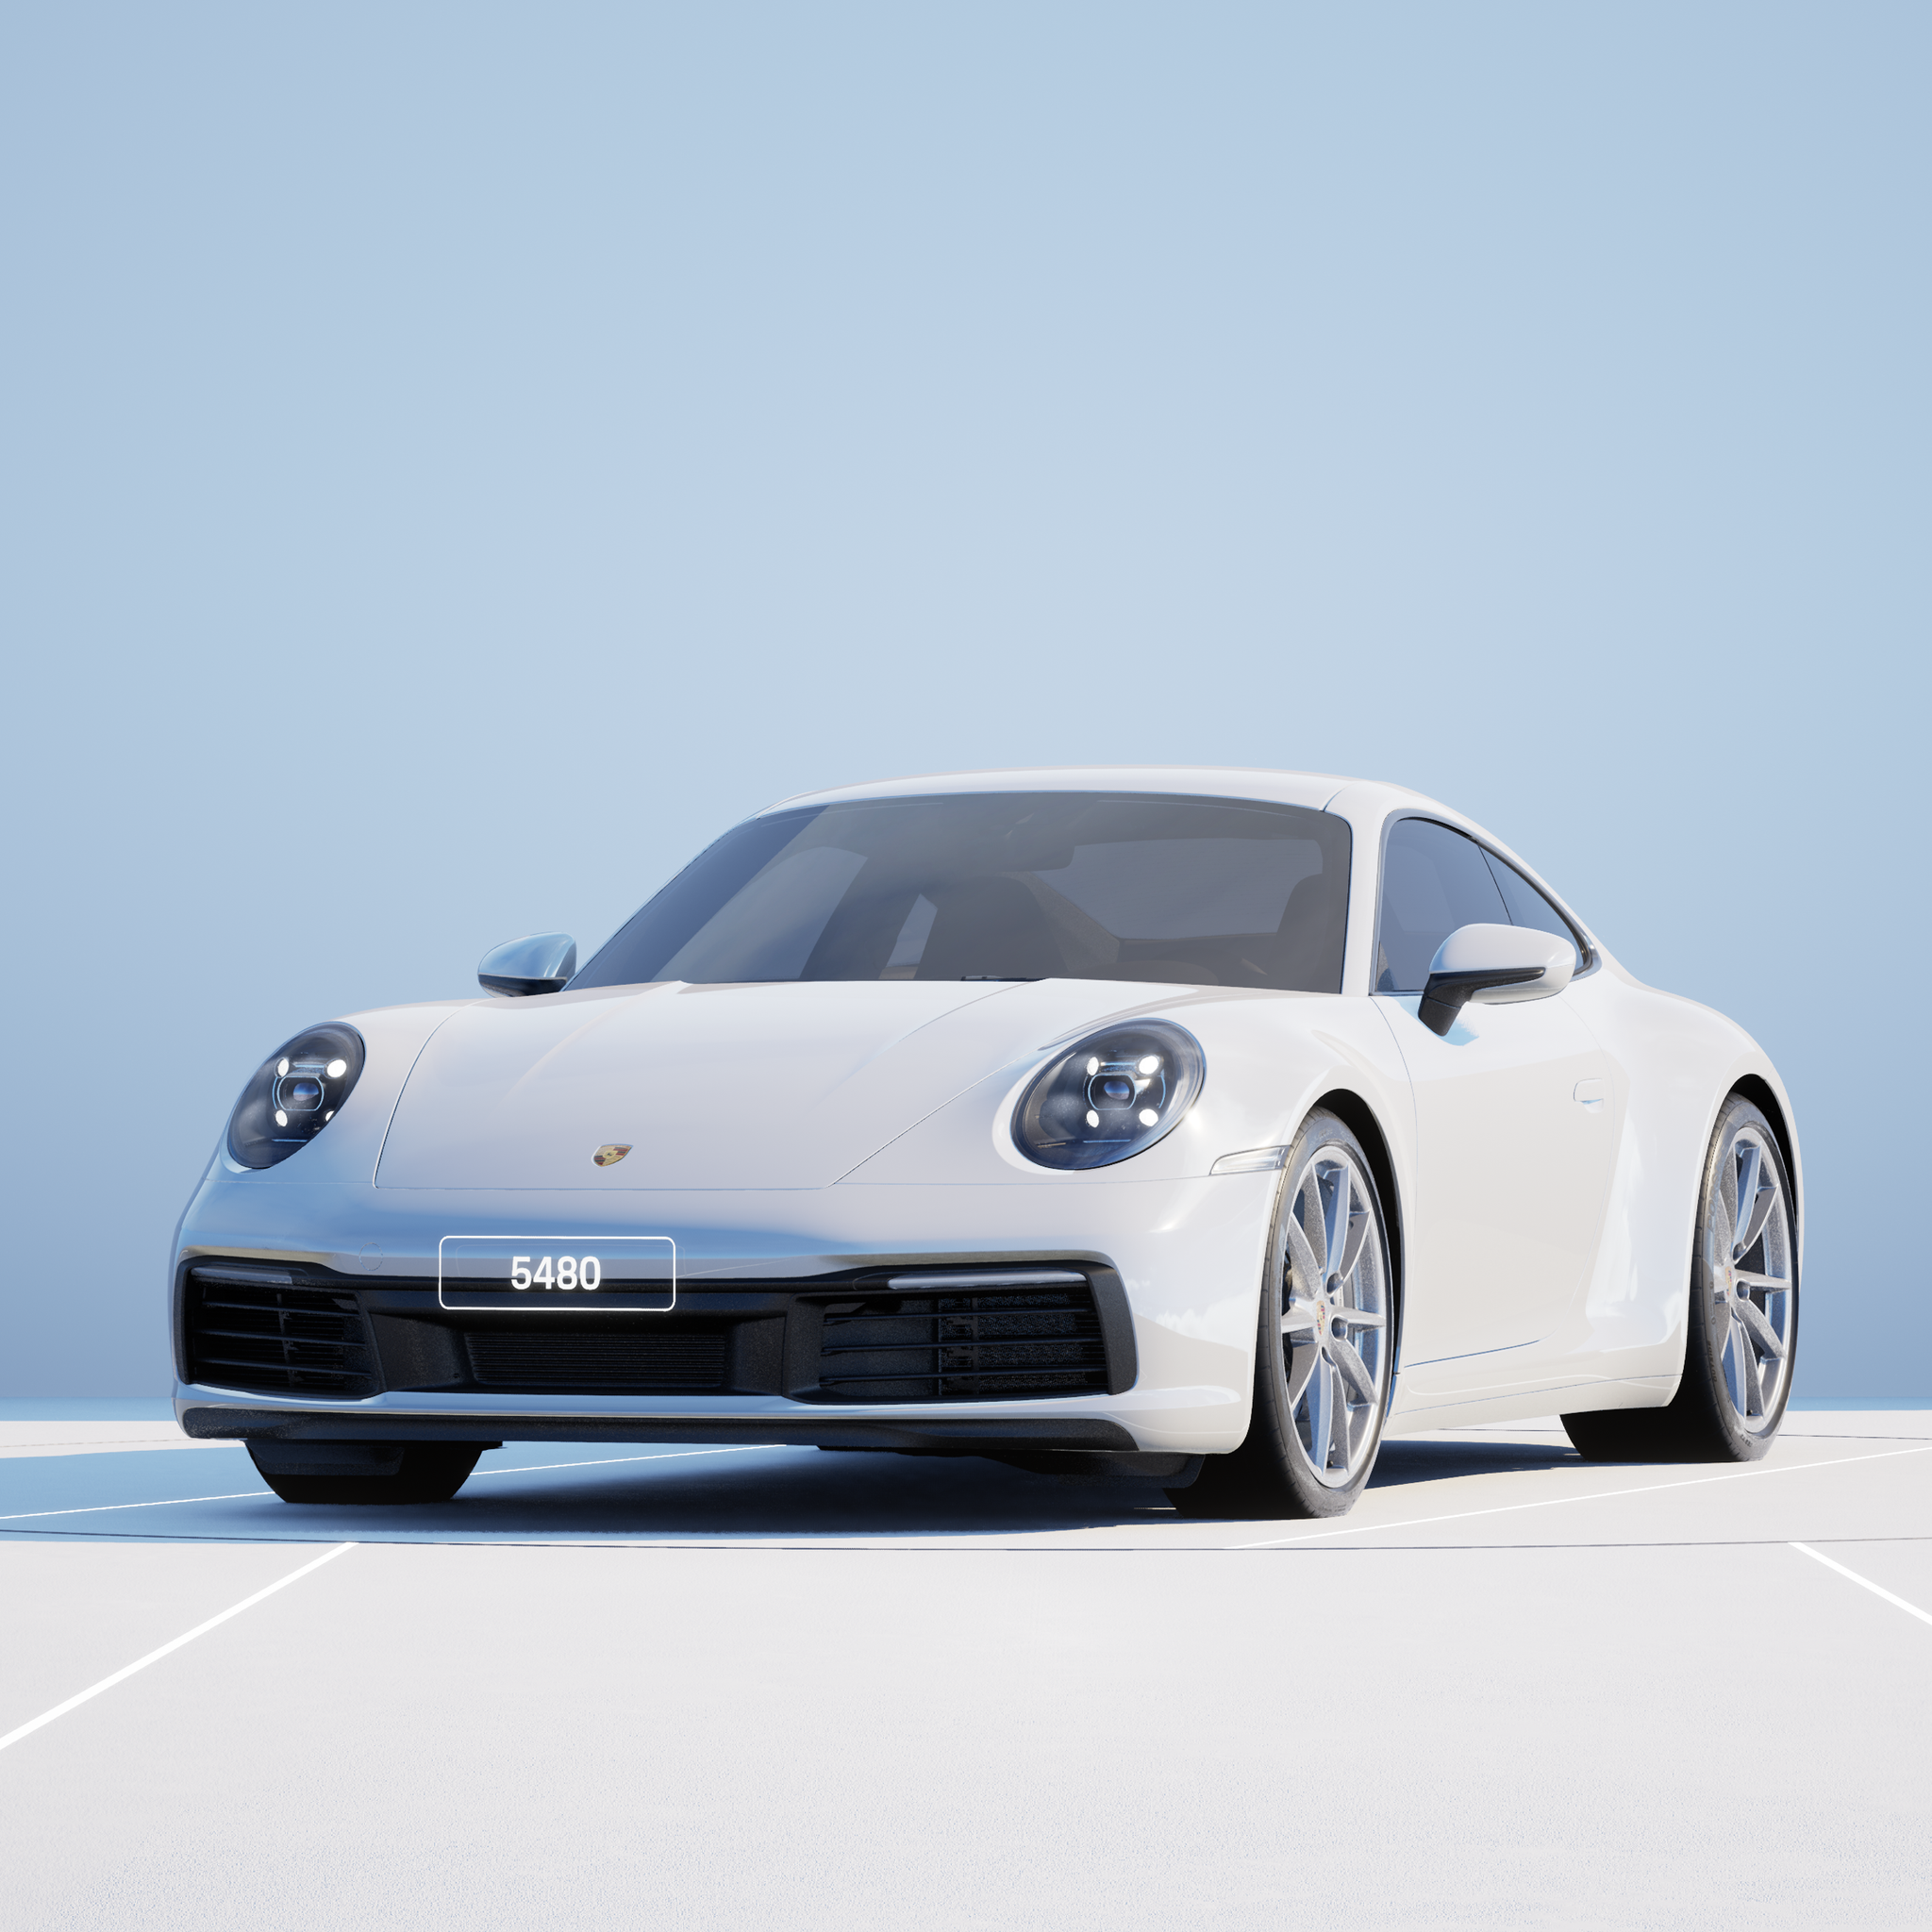 The PORSCHΞ 911 5480 image in phase